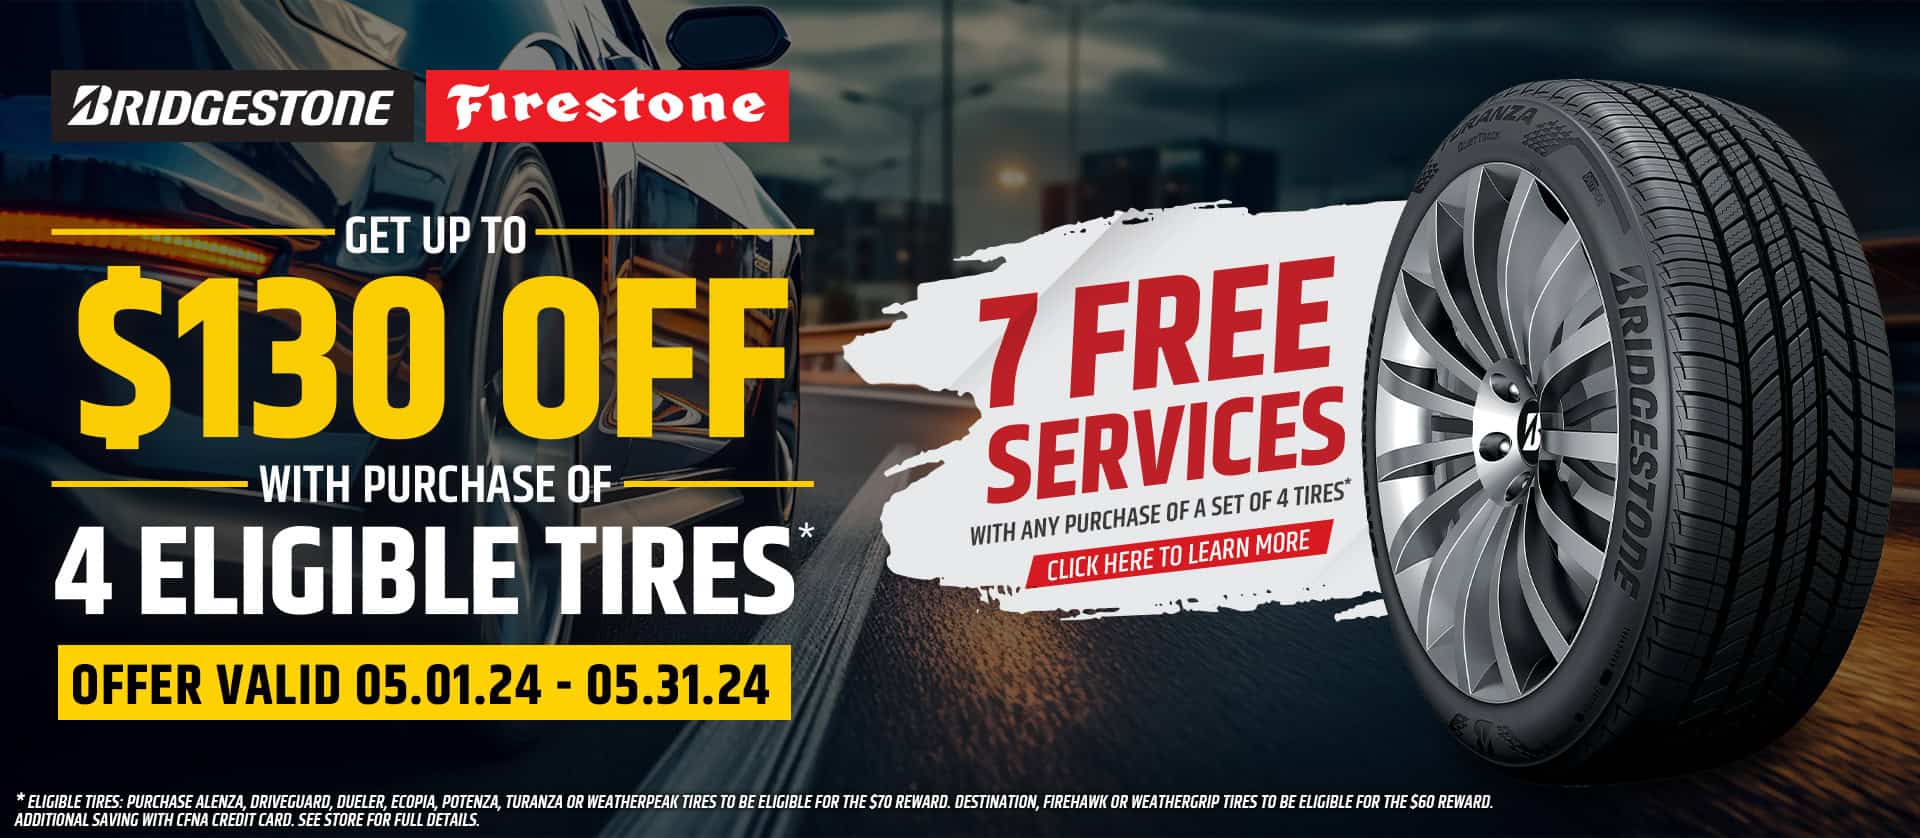 Heinold & Feller | Promotional advertisement for the best place to buy new Bridgestone and Firestone tires, featuring a close-up of a tire, with offers of up to $130 off and 7 free services on